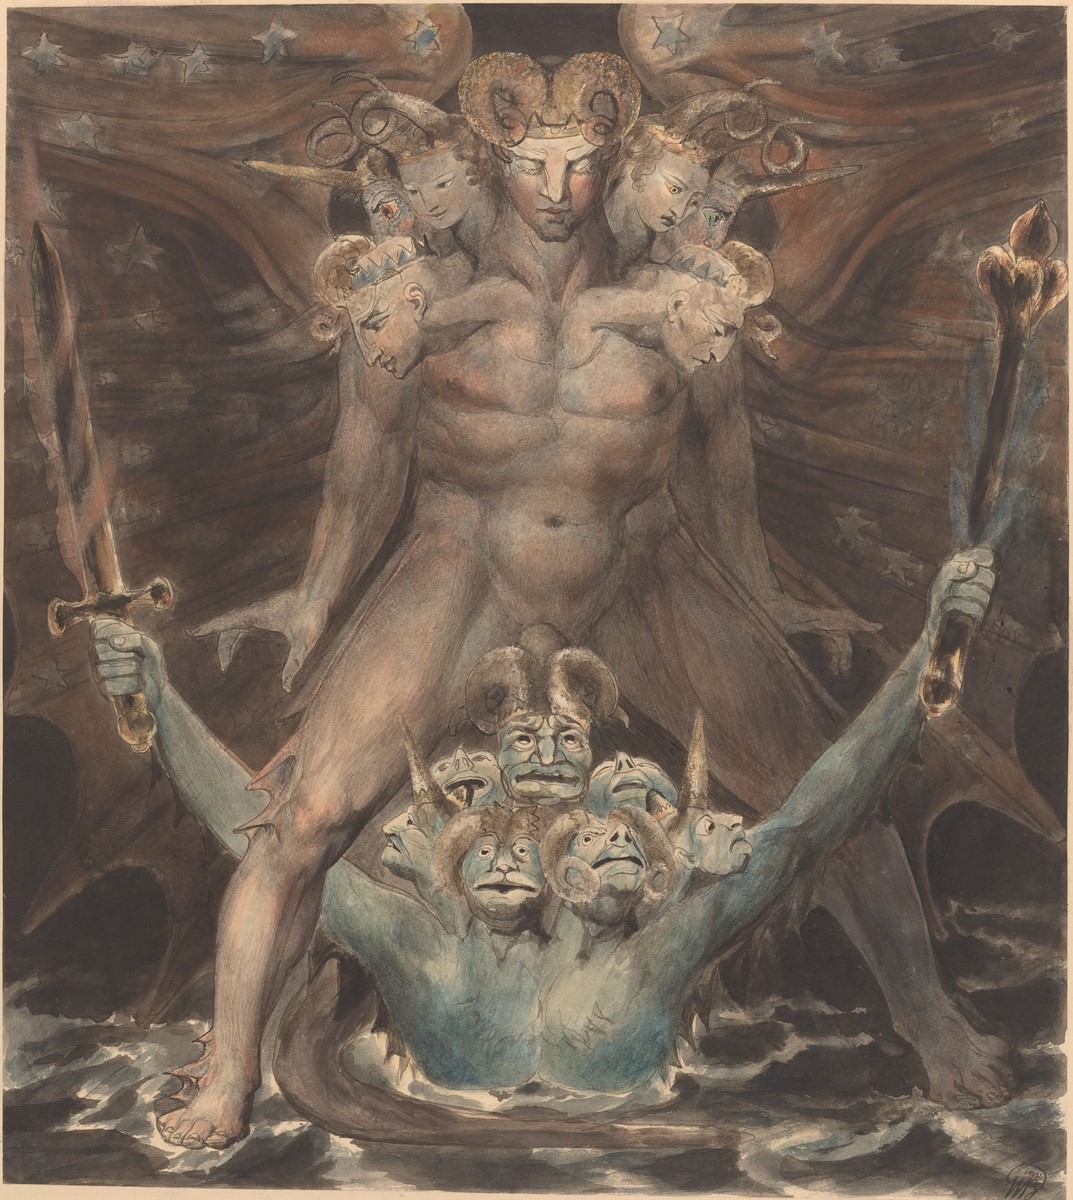 The Great Red Dragon and the Beast from the Sea, 1805. William Blake. National Gallery of Art, Washington. Rosenwald Collection.